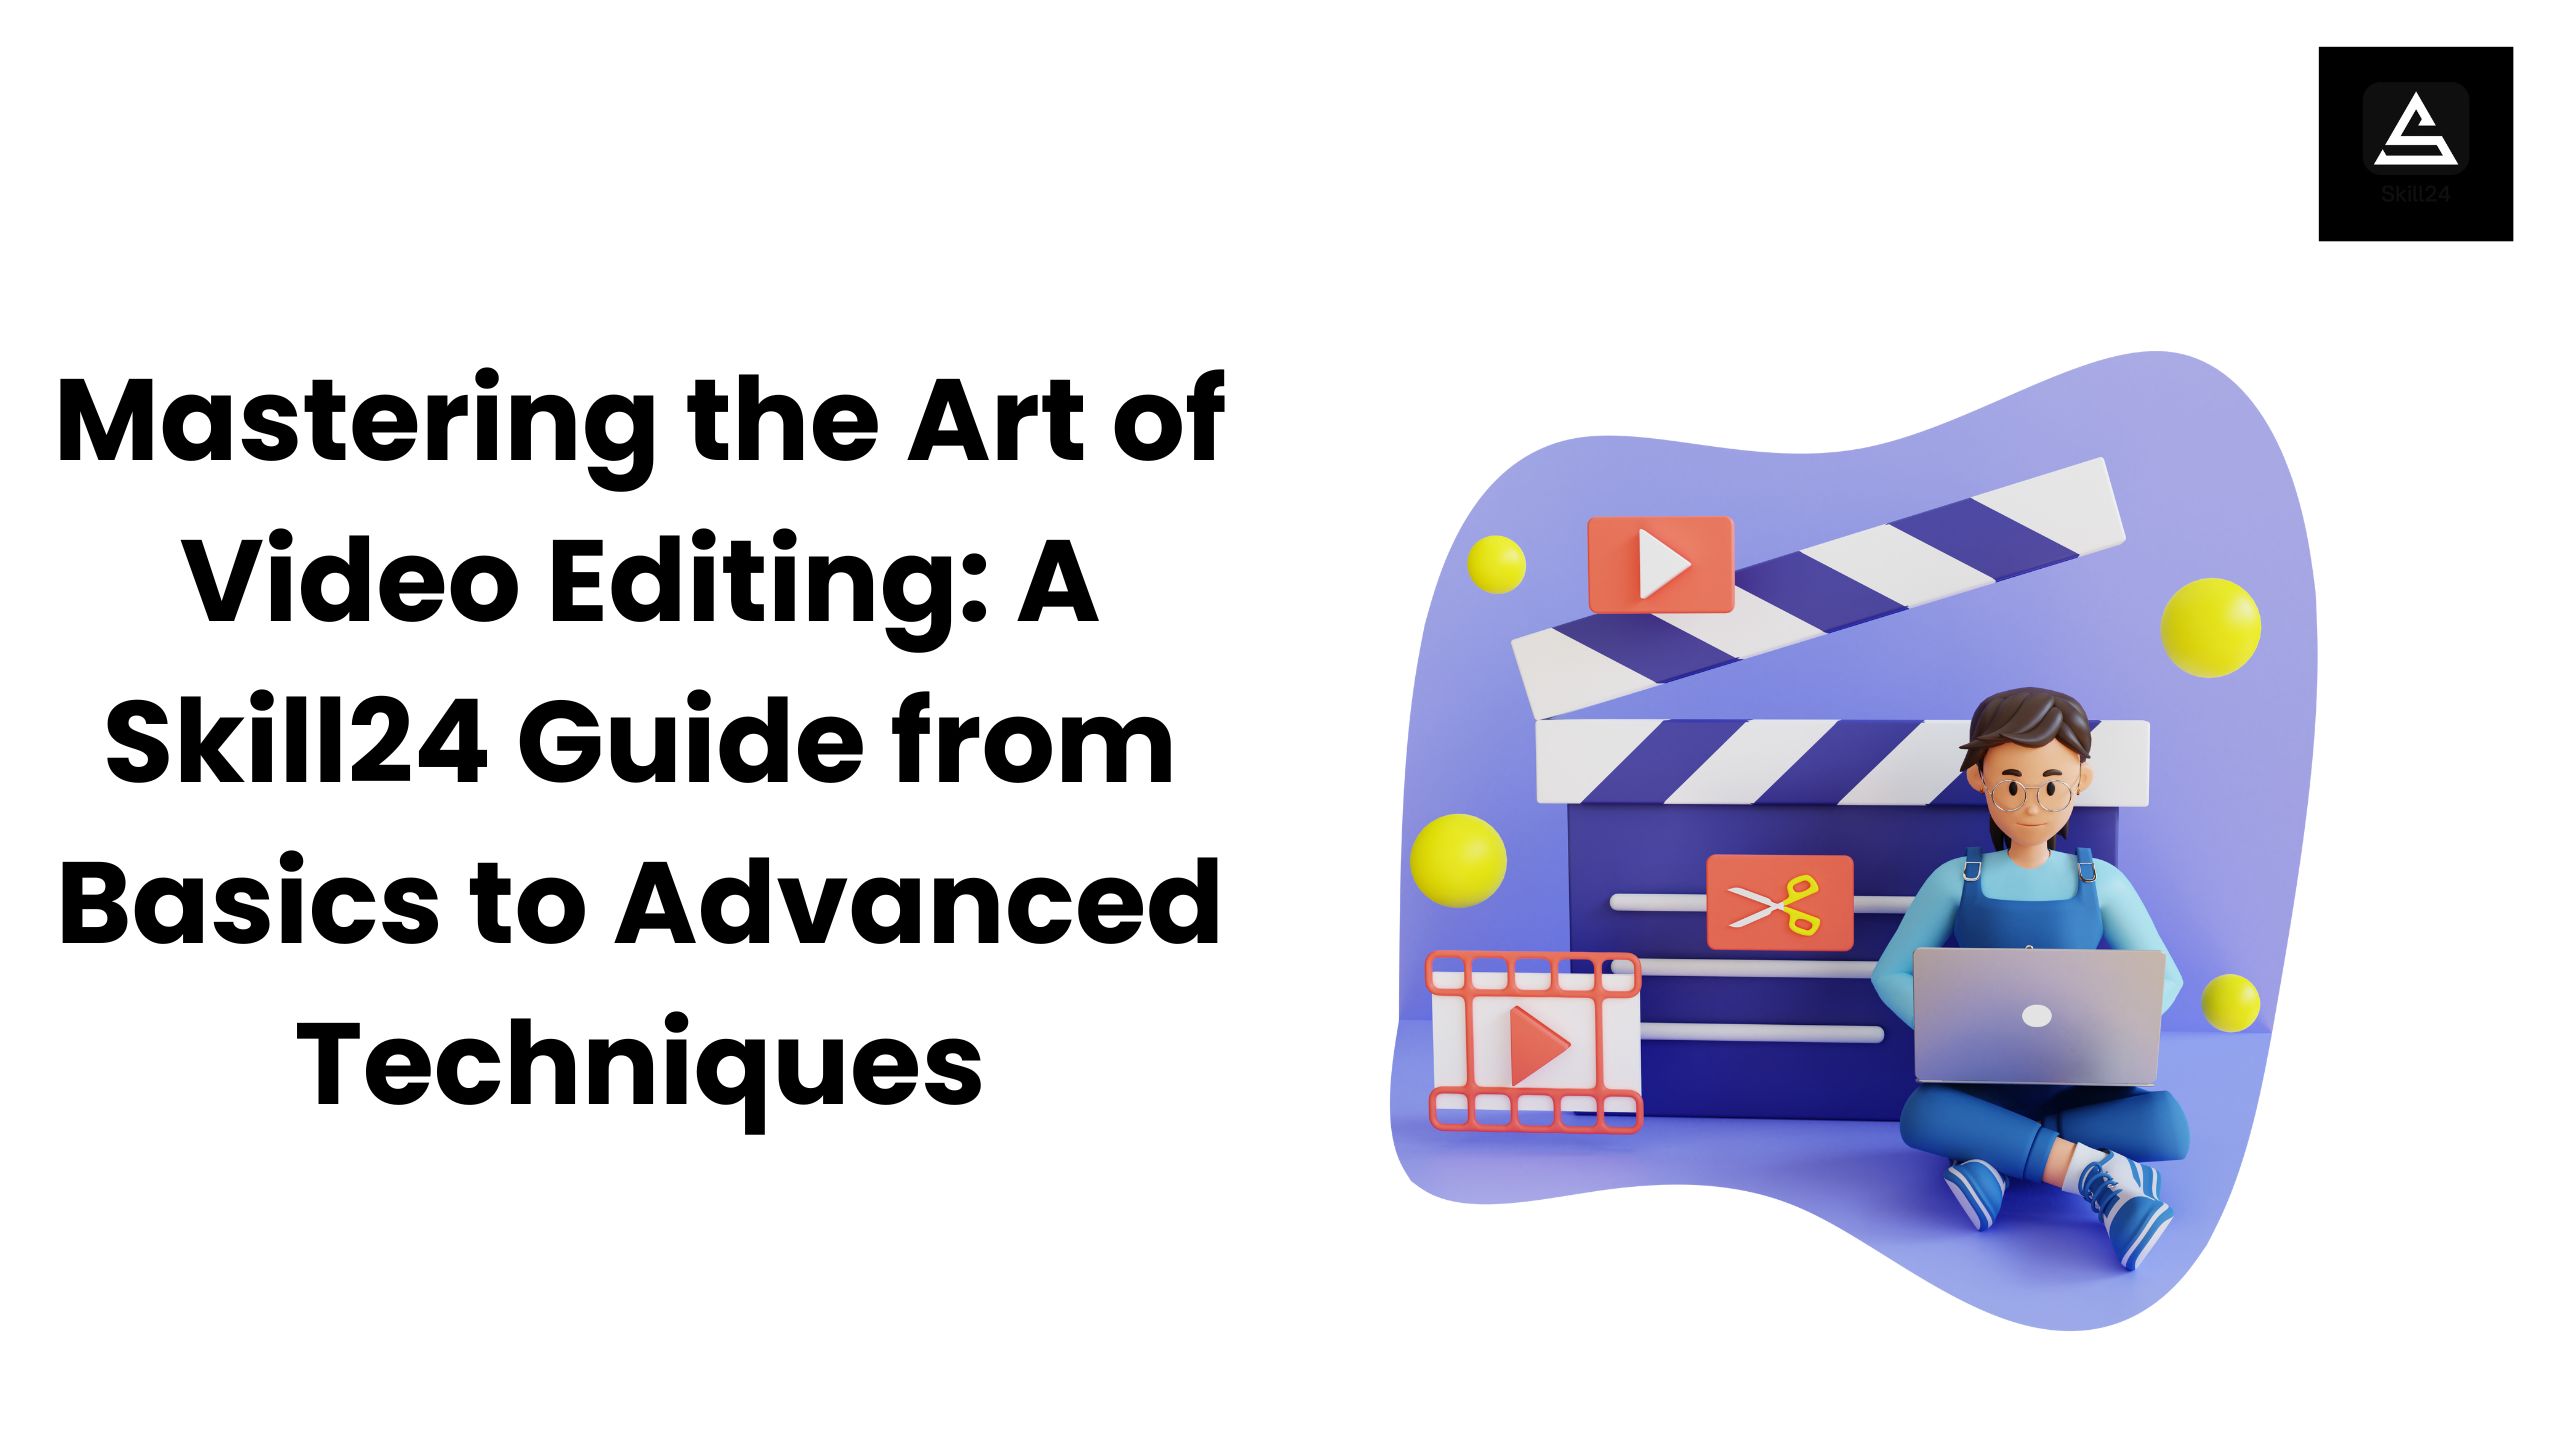 Mastering the Art of Video Editing: A Skill24 Guide from Basics to Advanced Techniques